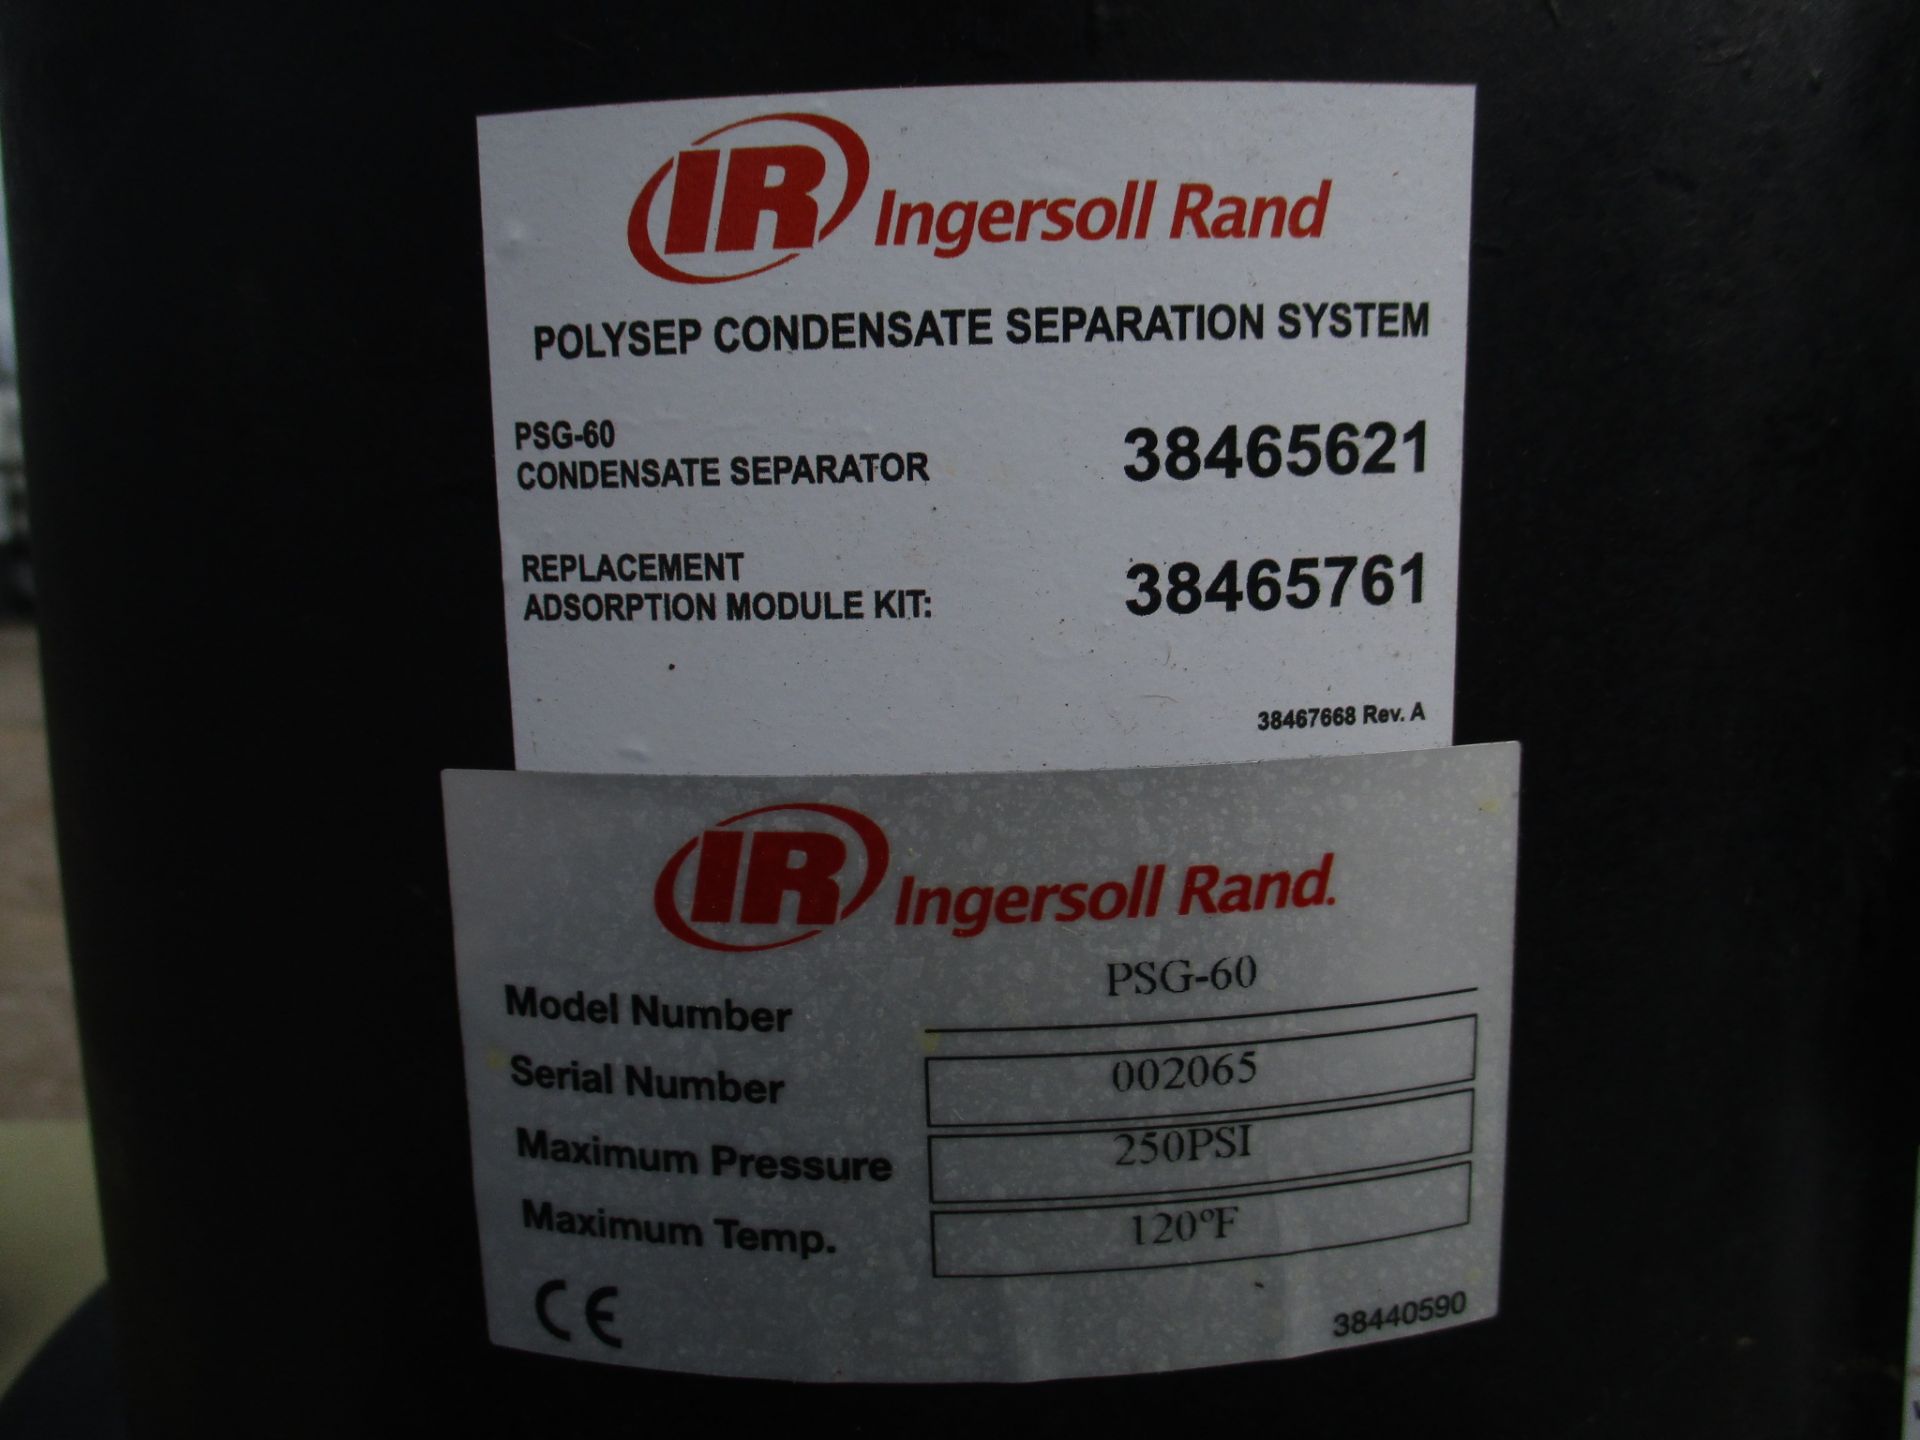 Ingersoll Rand PSG-60 Polysep Condensate Separation System, serial no. 002065, approx. 107cm x - Image 3 of 4